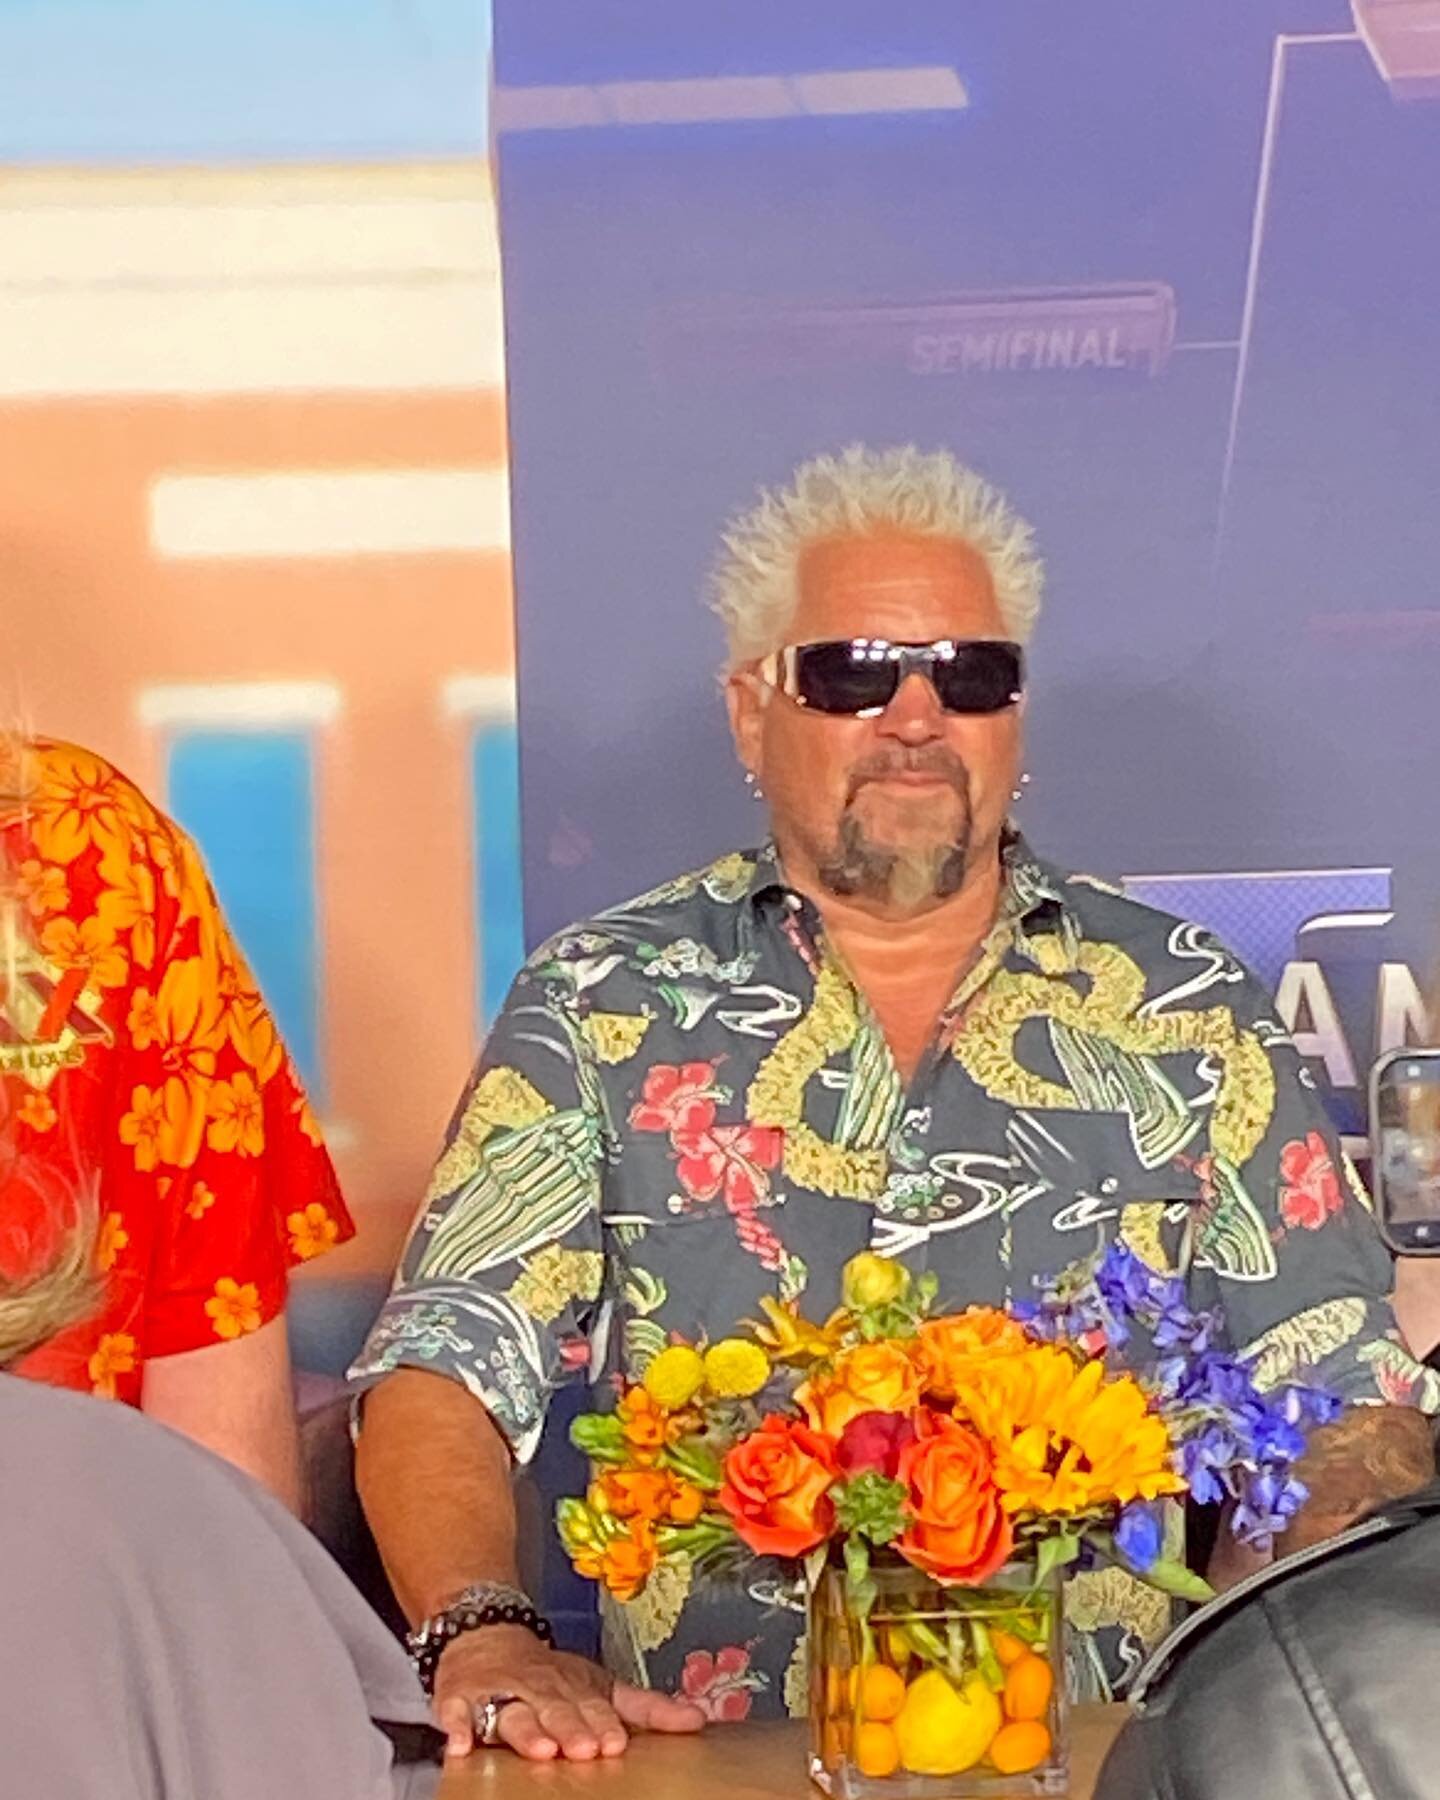 FYC Diners Drive-Ins &amp; Dives &ldquo;Triple D&rdquo; tonight @emmys with @guyfieri in between meet-n-greets 🎬📸 L❤️VED the tequila pairings! Thank you for all you do in the world! 💕🙏🏻 PS Now I know the secret to a great gravy! 🧑&zwj;🍳